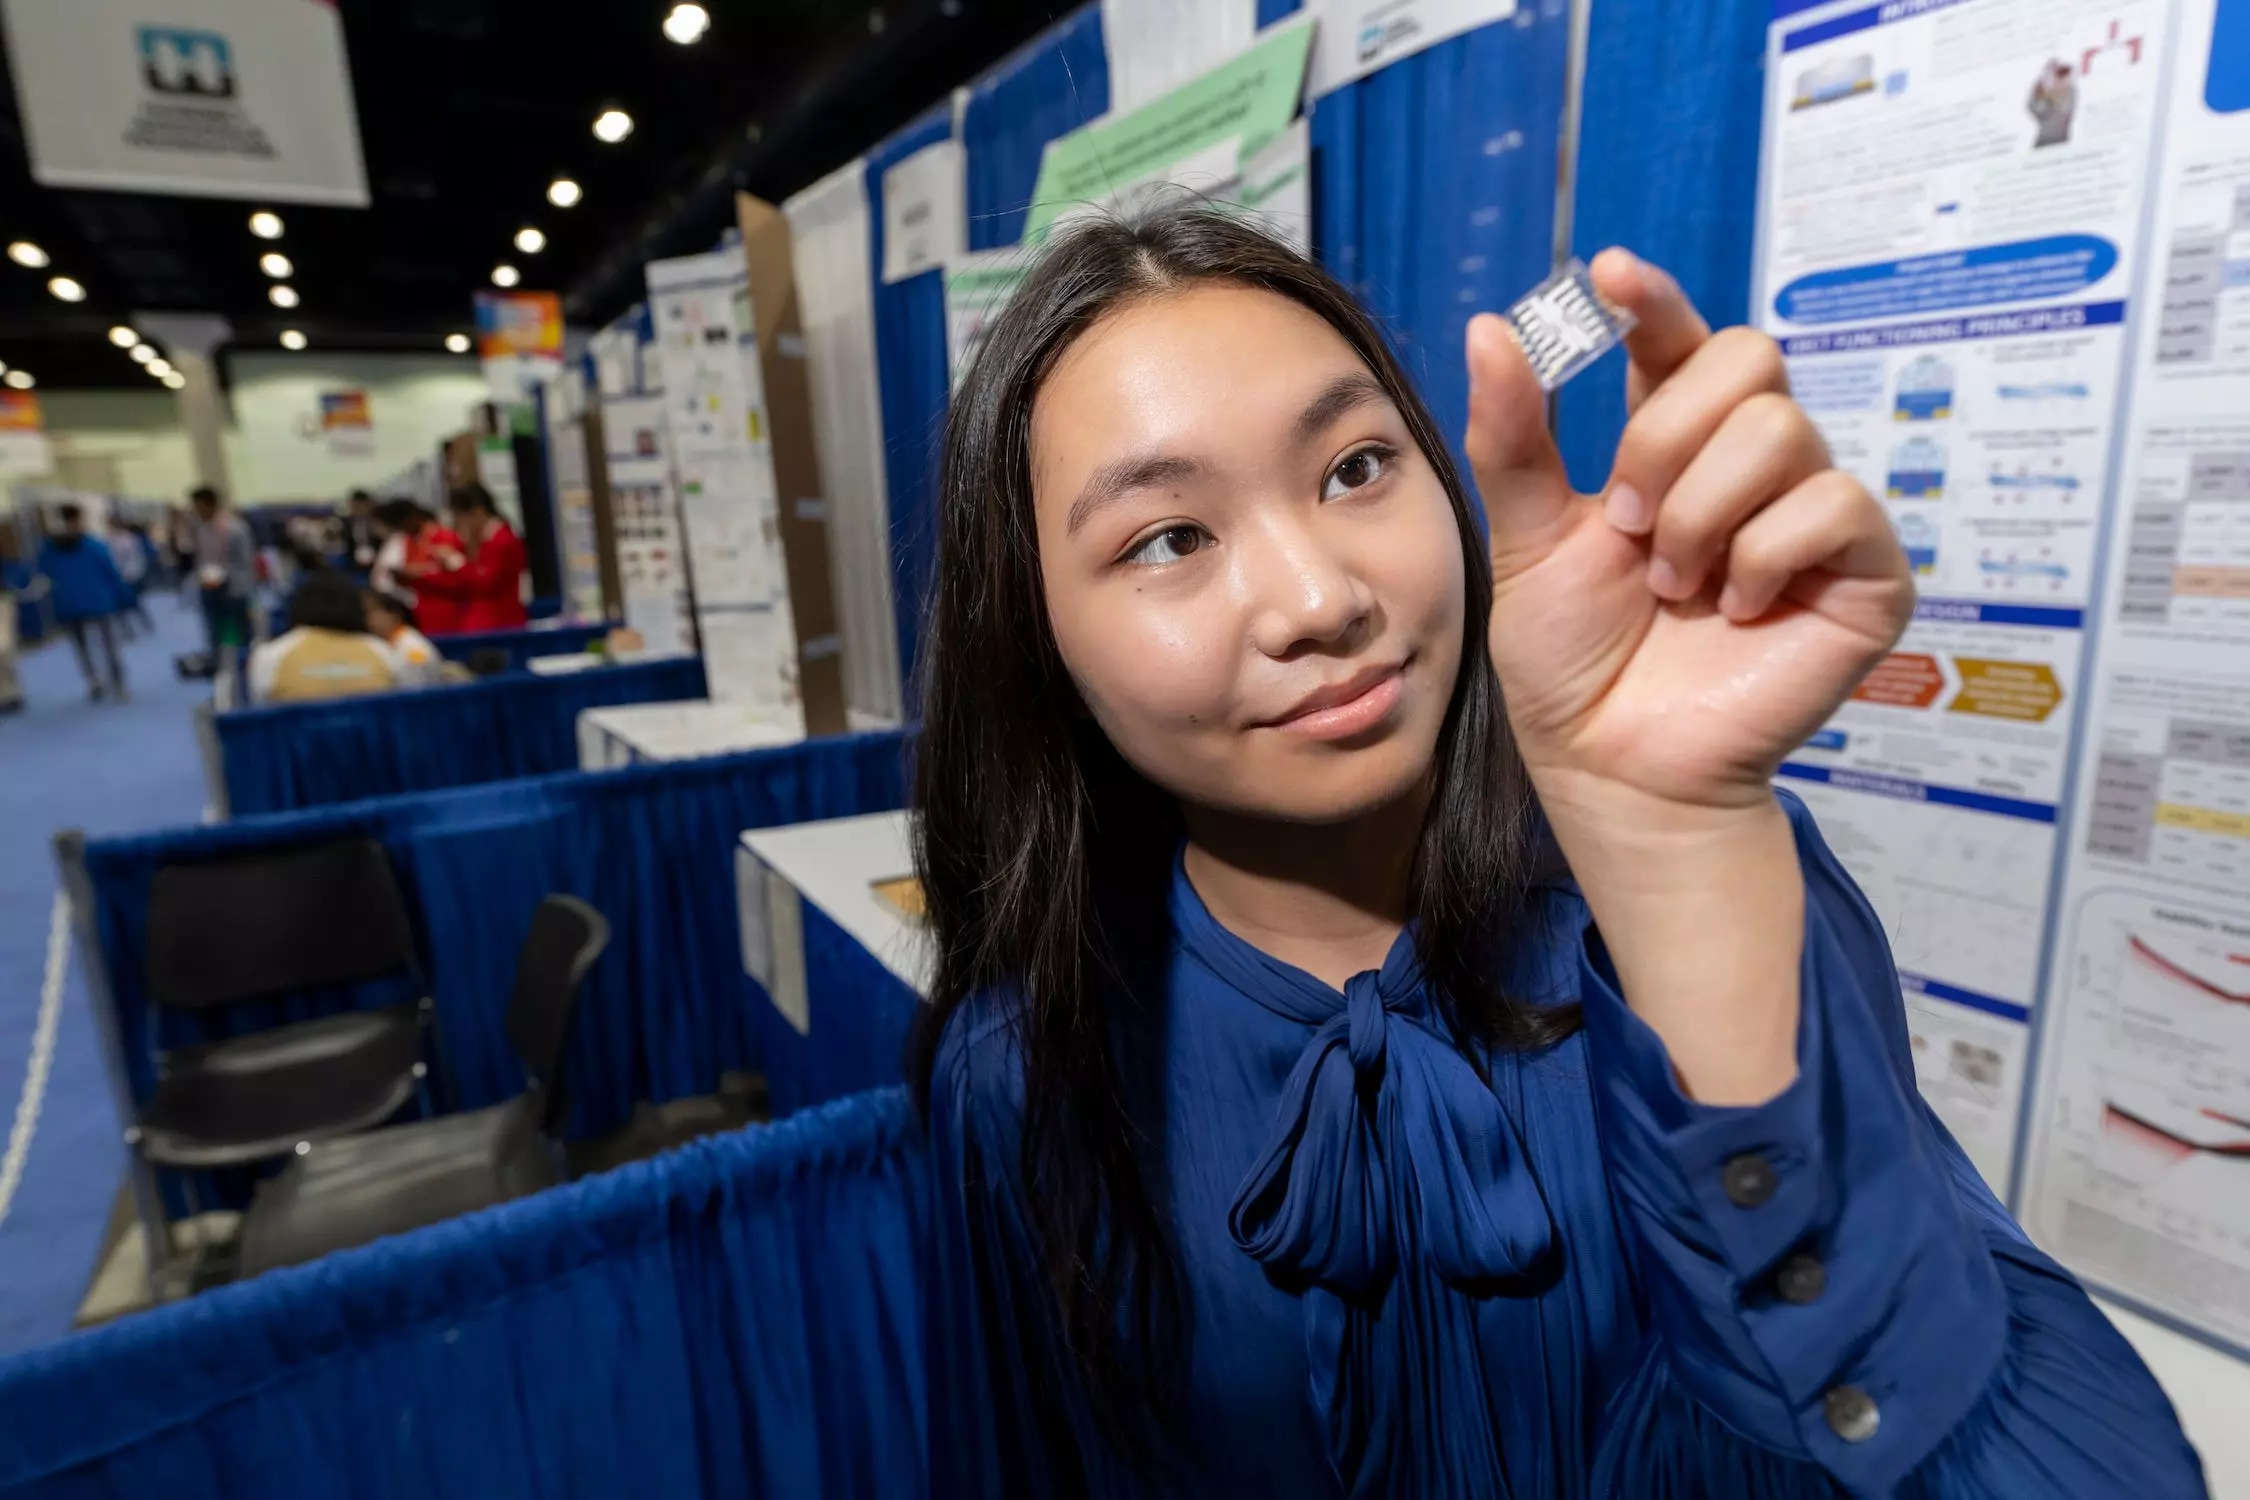 A girl in blue shirt with long dark hair holds a small OETC device that looks like a small clear square with white inside